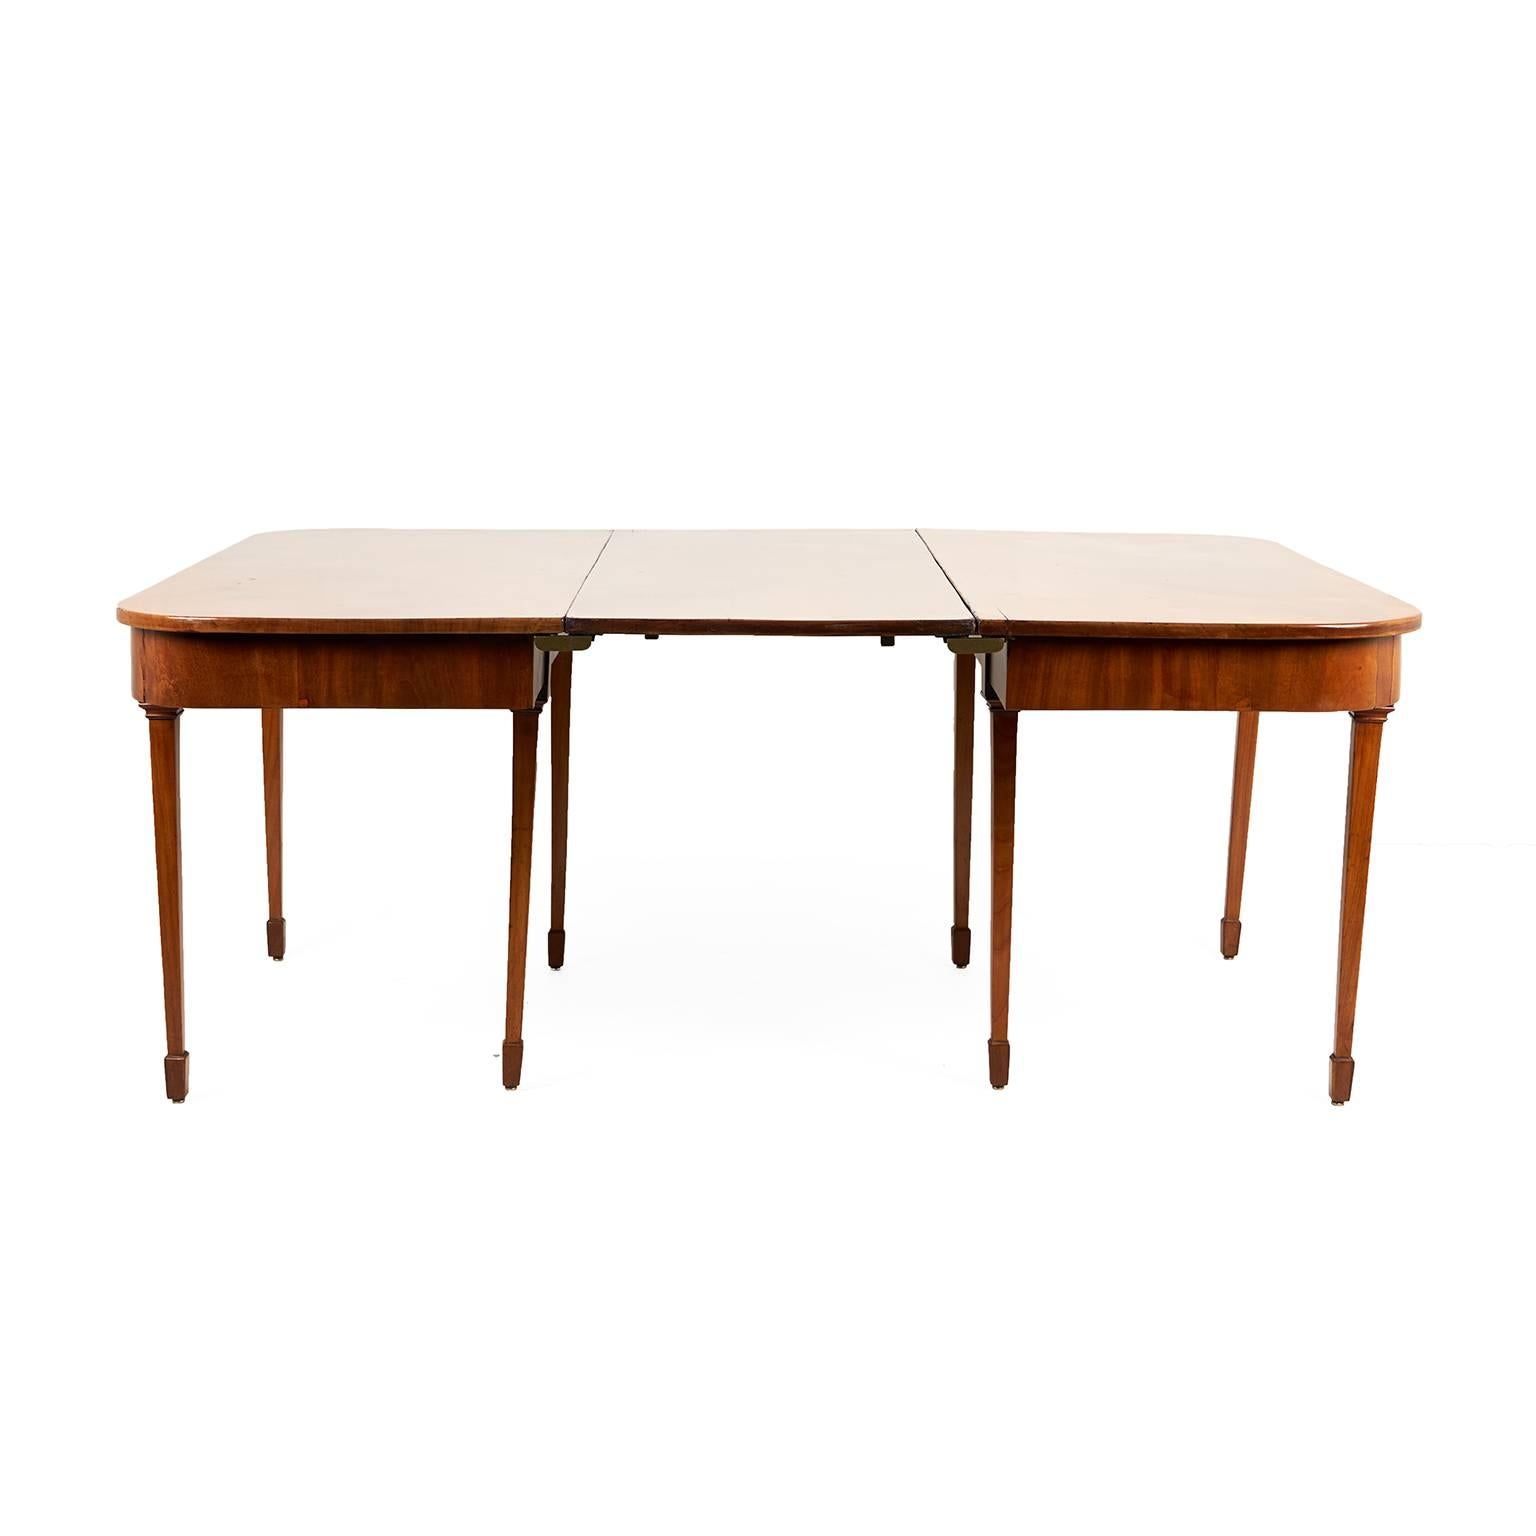 An English Georgian dining table, comprised of two ‘D’ ends, with a single.
circa 1820.


Measures: Each ‘D’ end: 52 inches wide x 24 inches deep x 28 inches tall. Leaf is 20 inches.
Table with leaf in: 68 inches wide x 52 inches deep x 28 inches